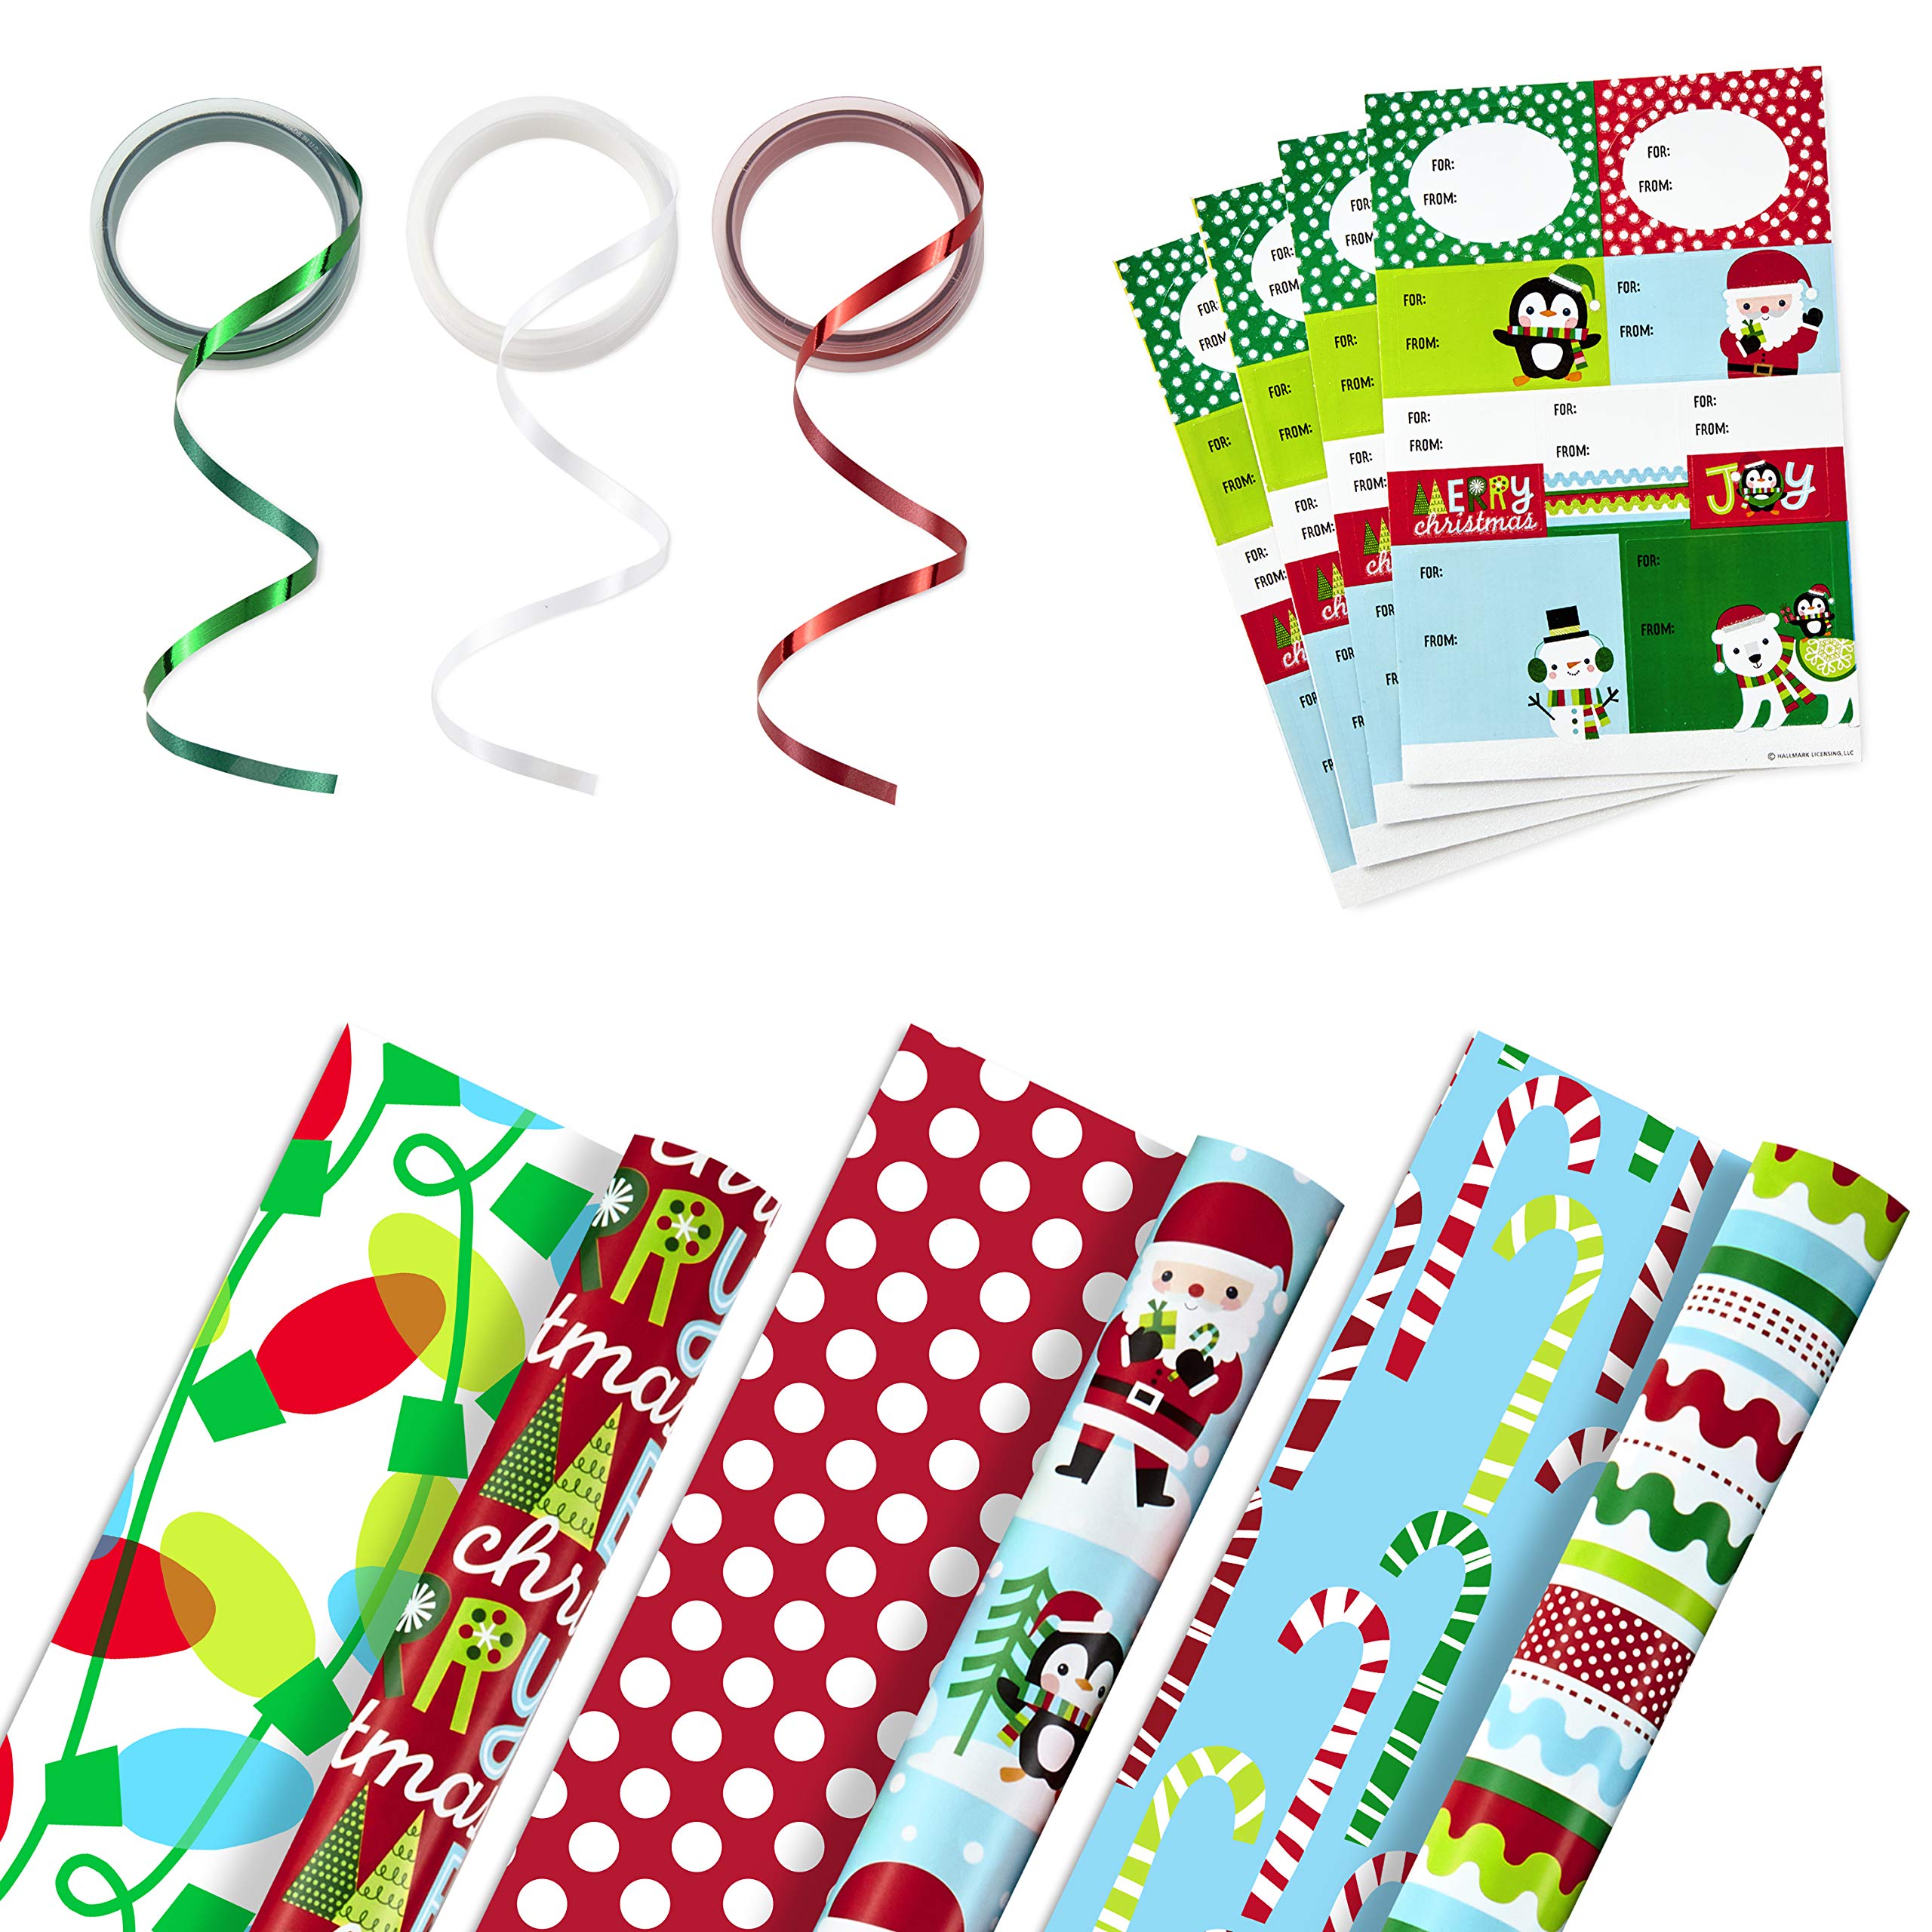 Hallmark Reversible Christmas Wrapping Paper Set with Ribbon and Gift Tag Stickers (3 Rolls of Wrapping Paper and Ribbon; Santa, Penguins, Stripes, Dots)